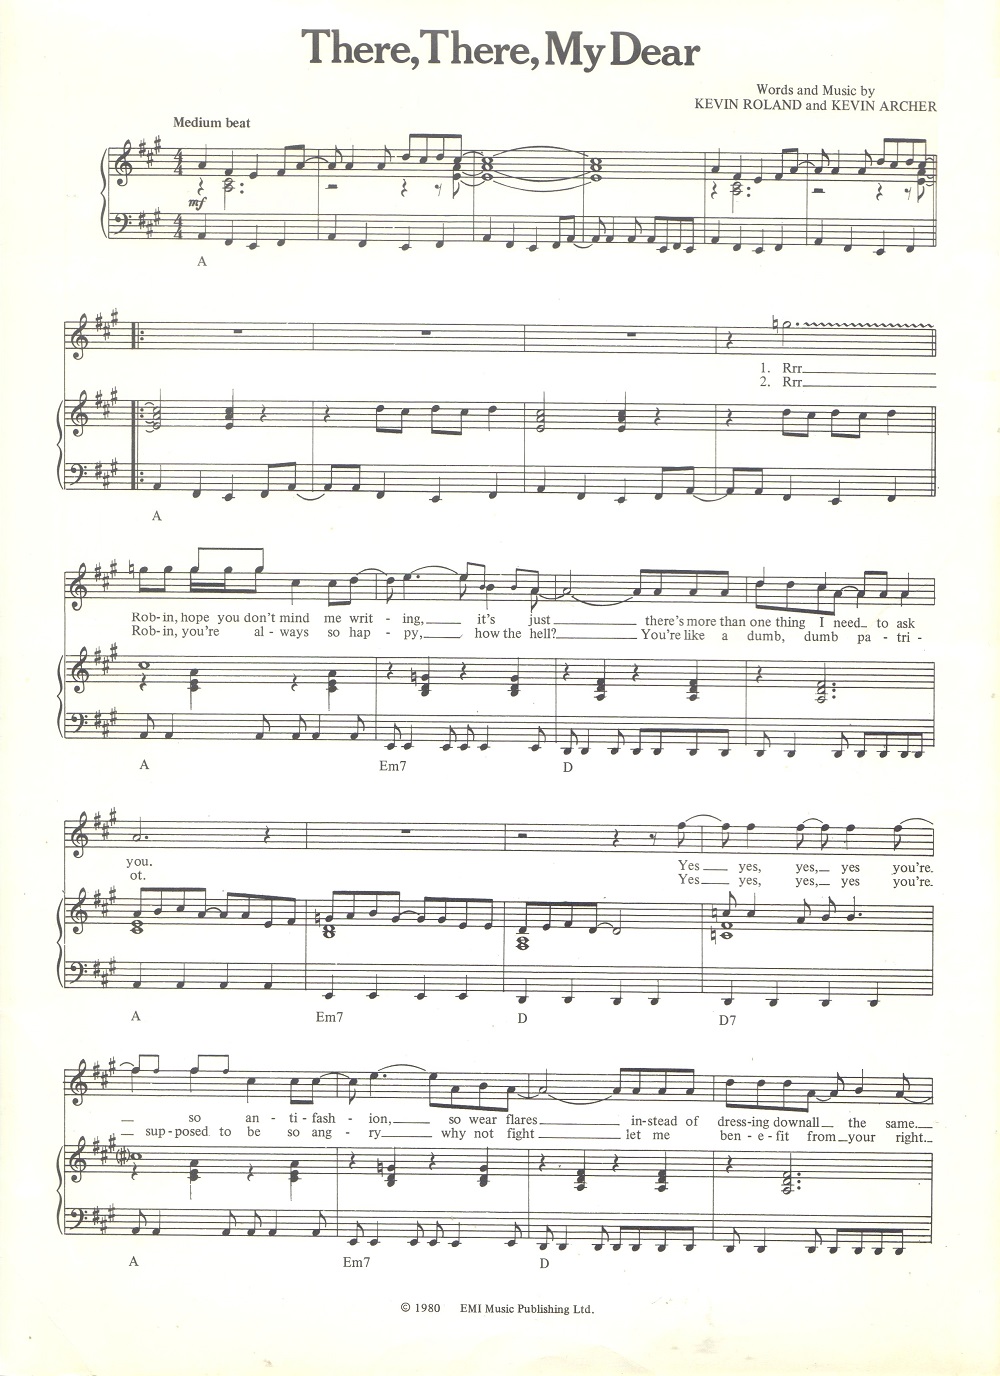 There_There_My_Dear_Sheet_Music_2.jpg